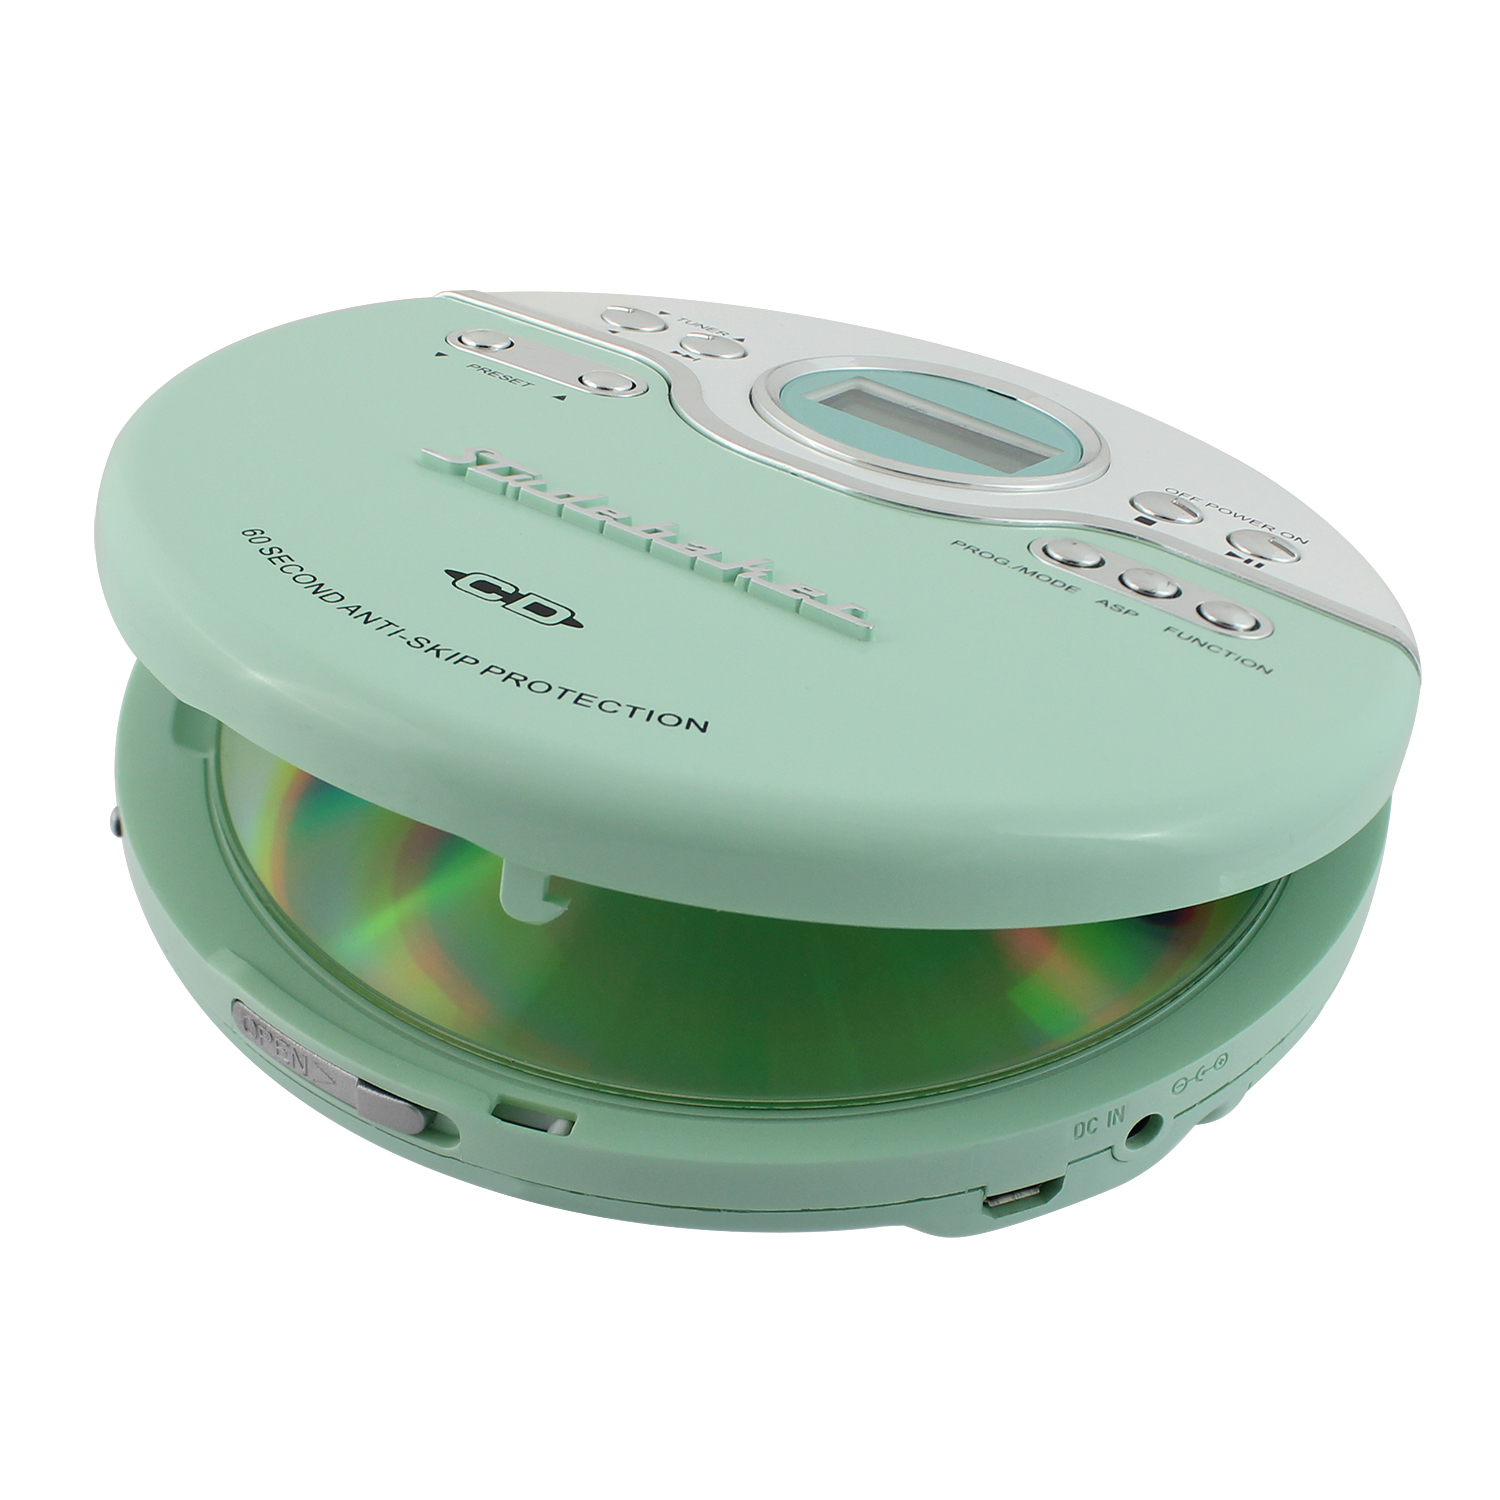 Studebaker Sb3703mw Personal Jogging CD Player with FM Pll Radio (Mint Green/white) - image 5 of 5